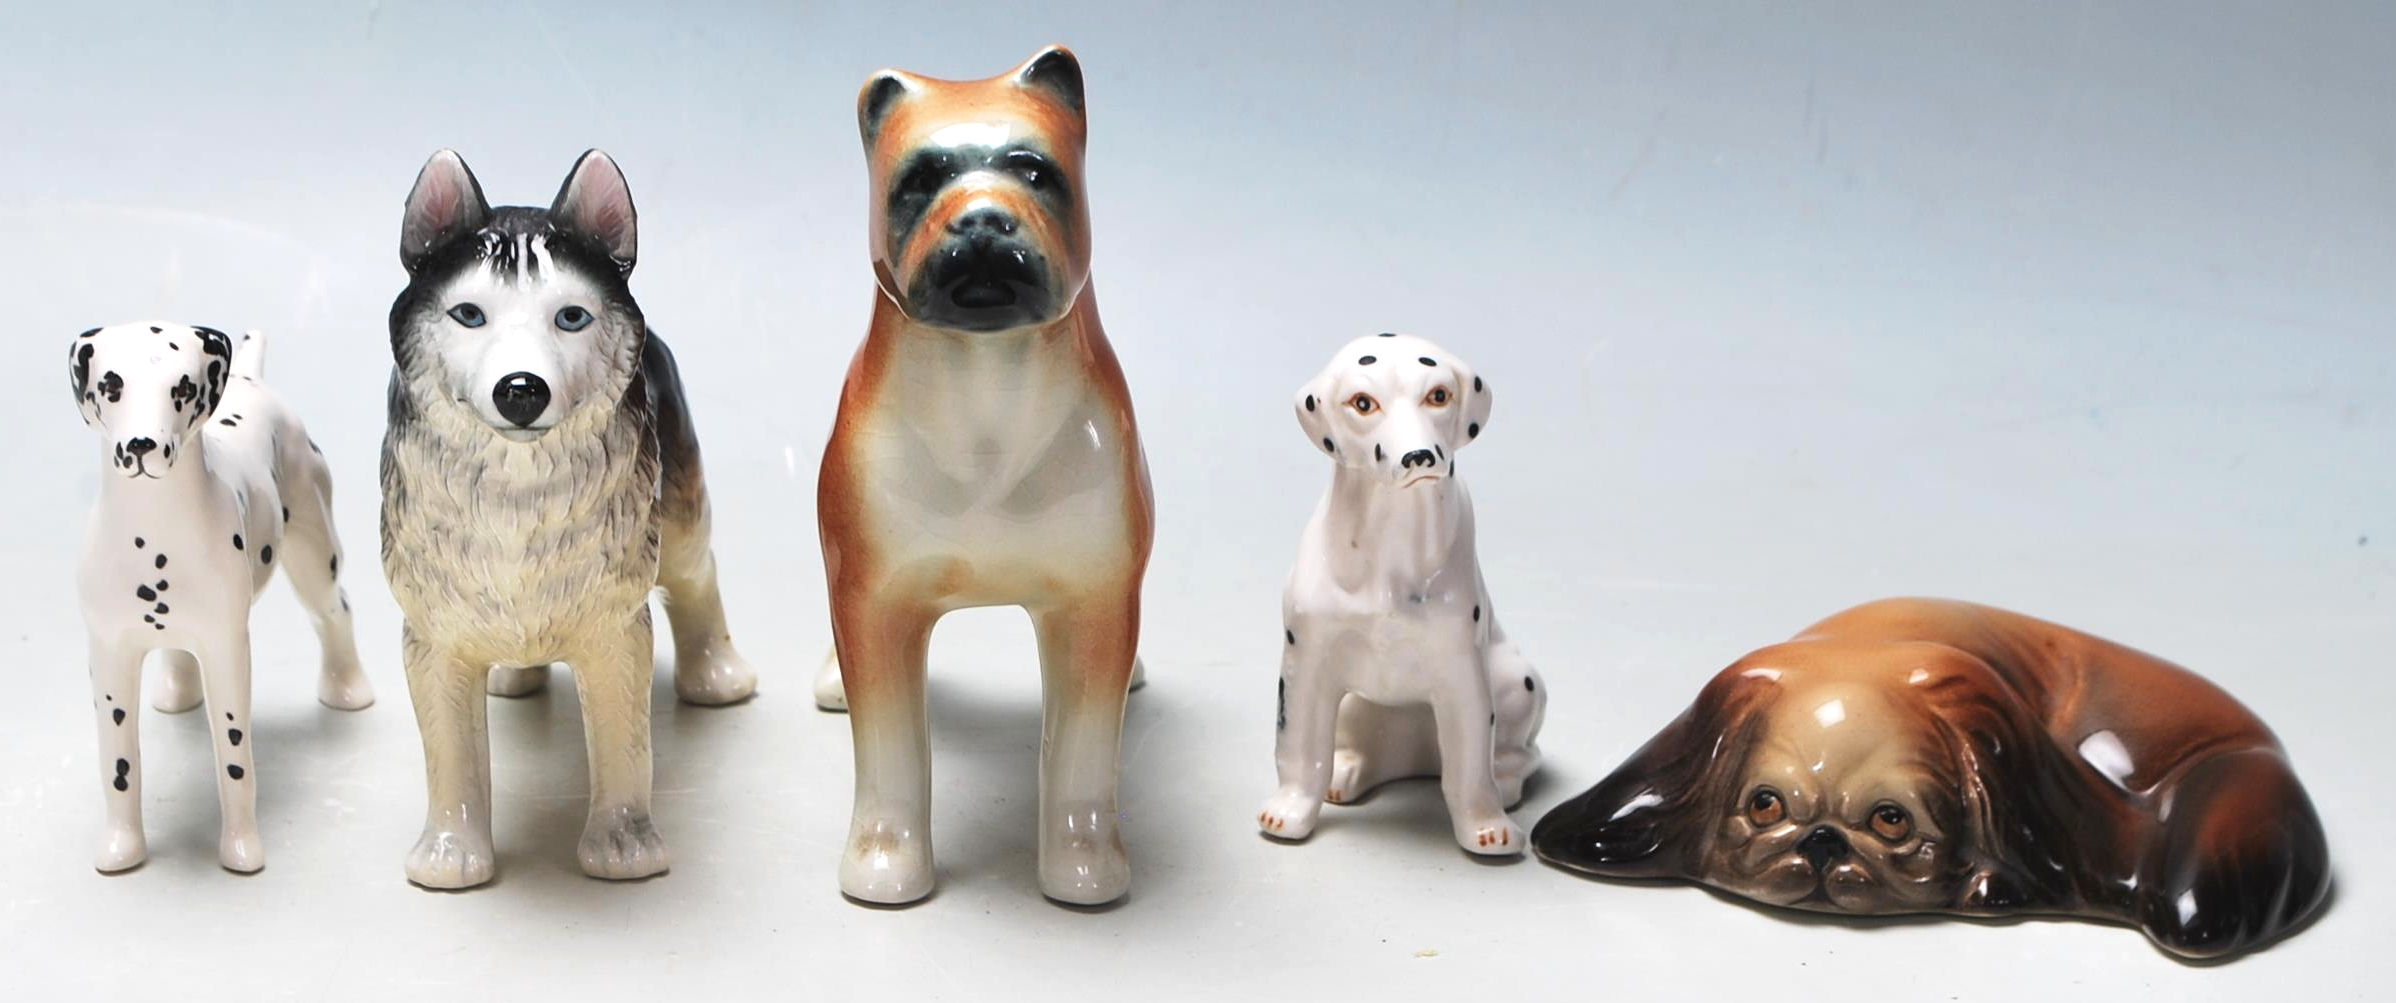 A collection of 20th Century ceramic figurines of